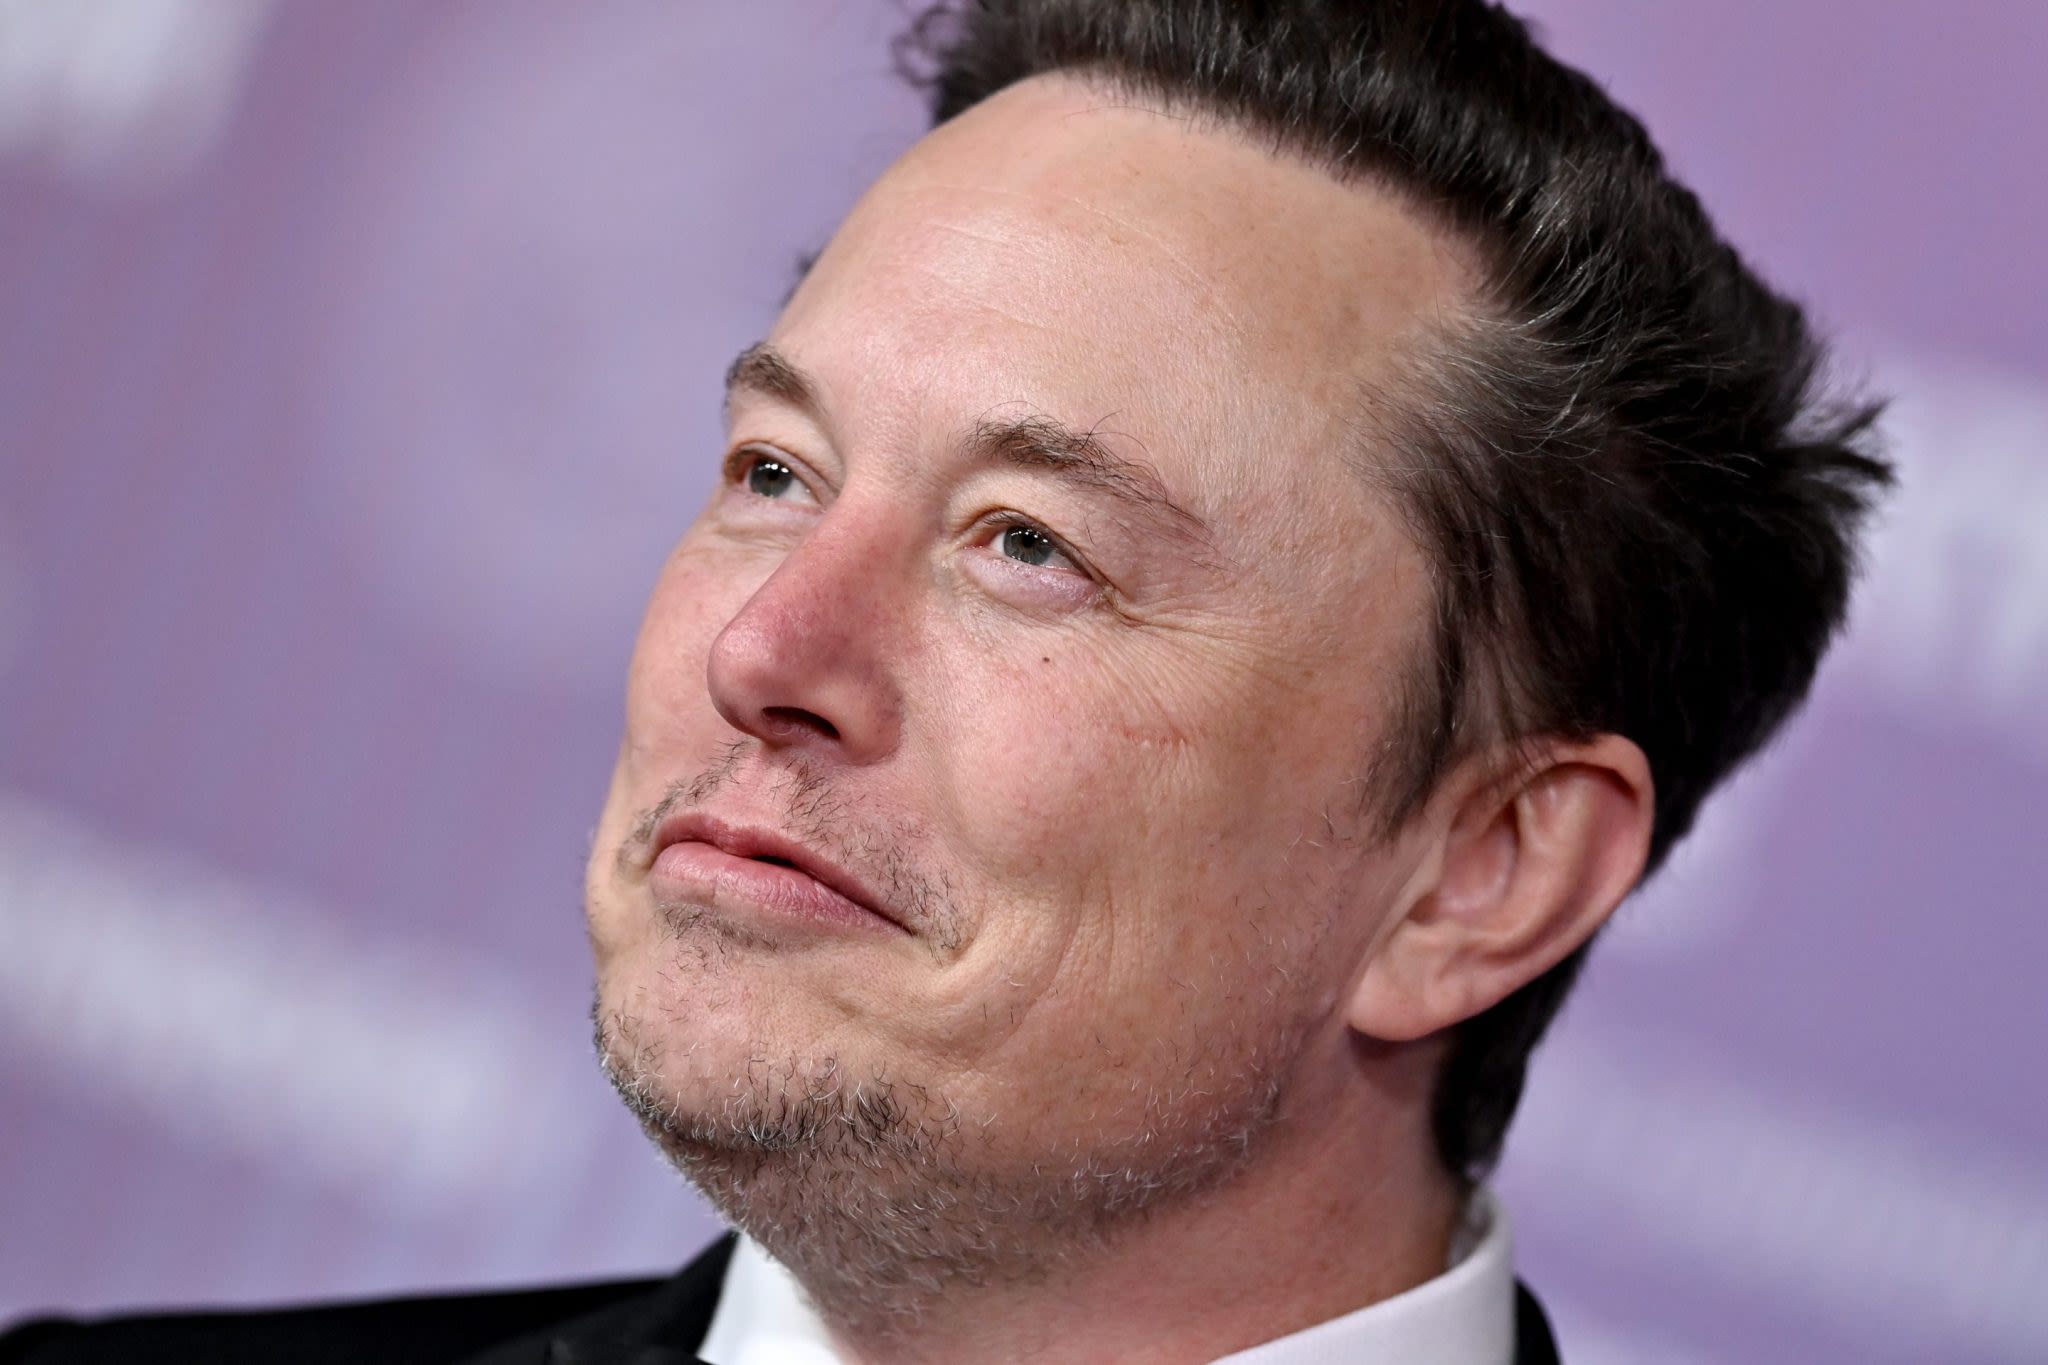 Elon Musk is opening a Montessori school in Texas this fall